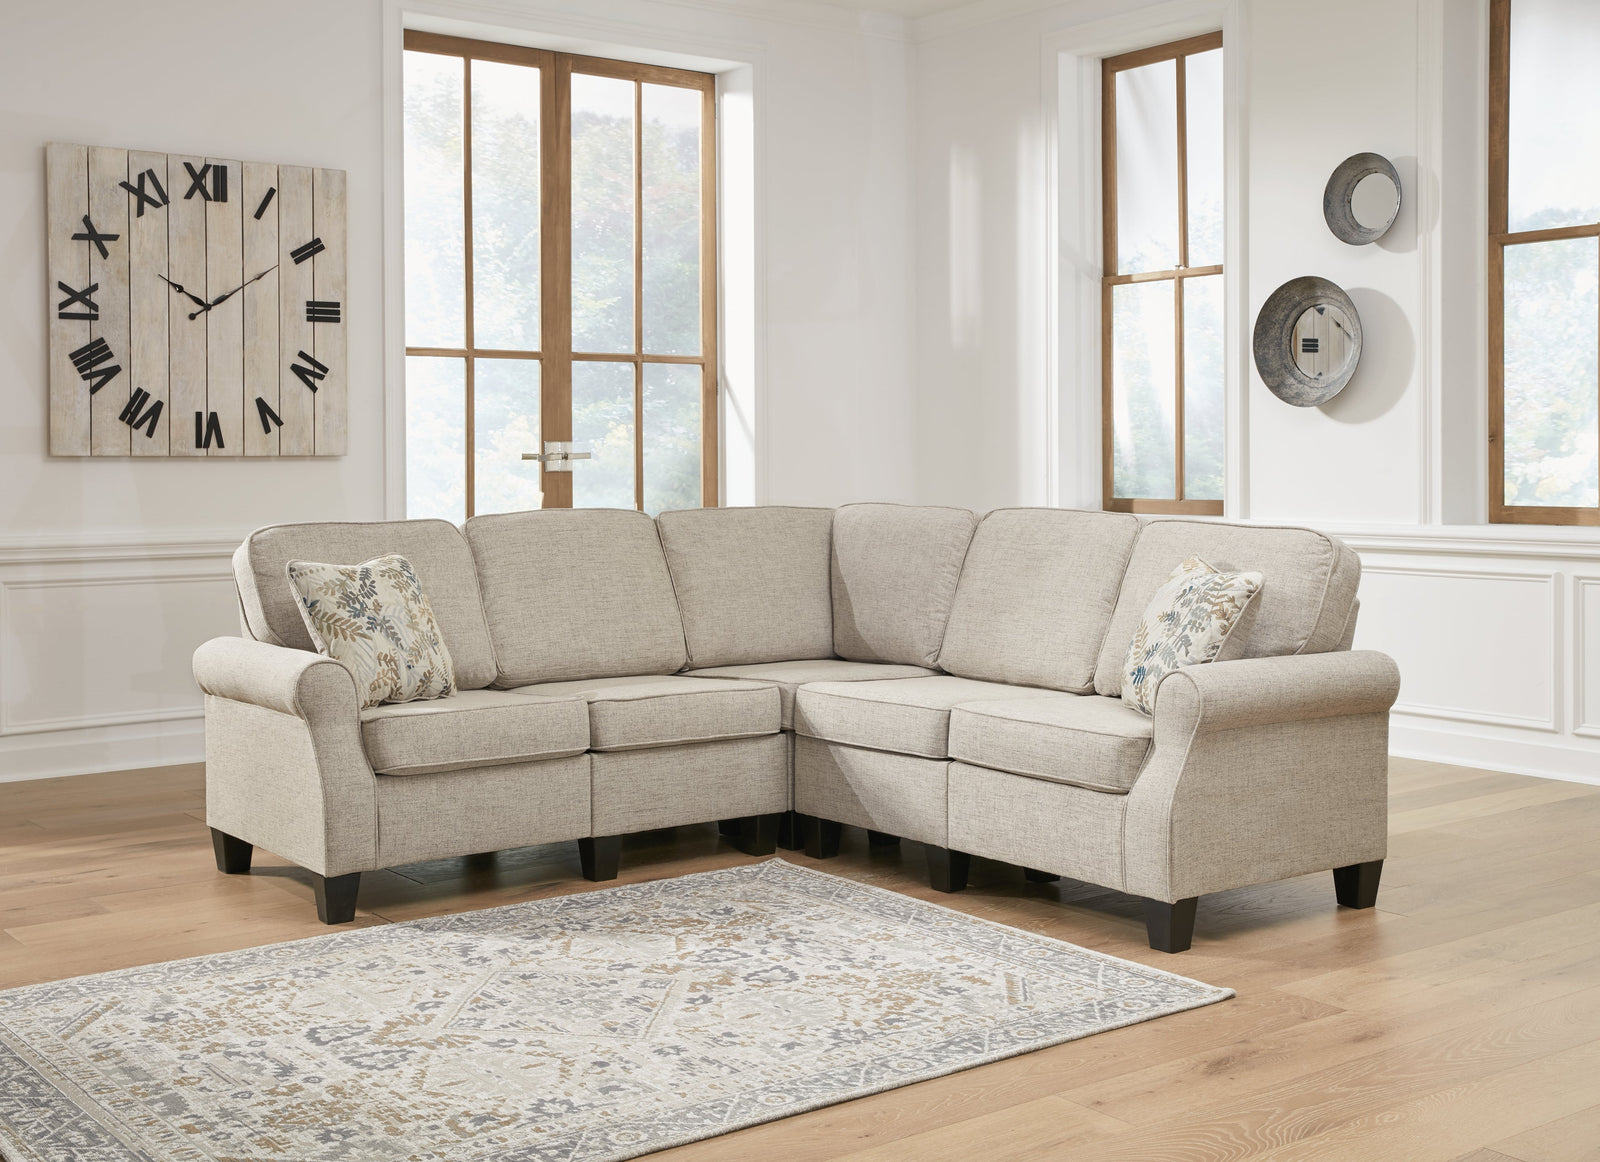 Alessio Beige Chenille 4-Piece Sectional